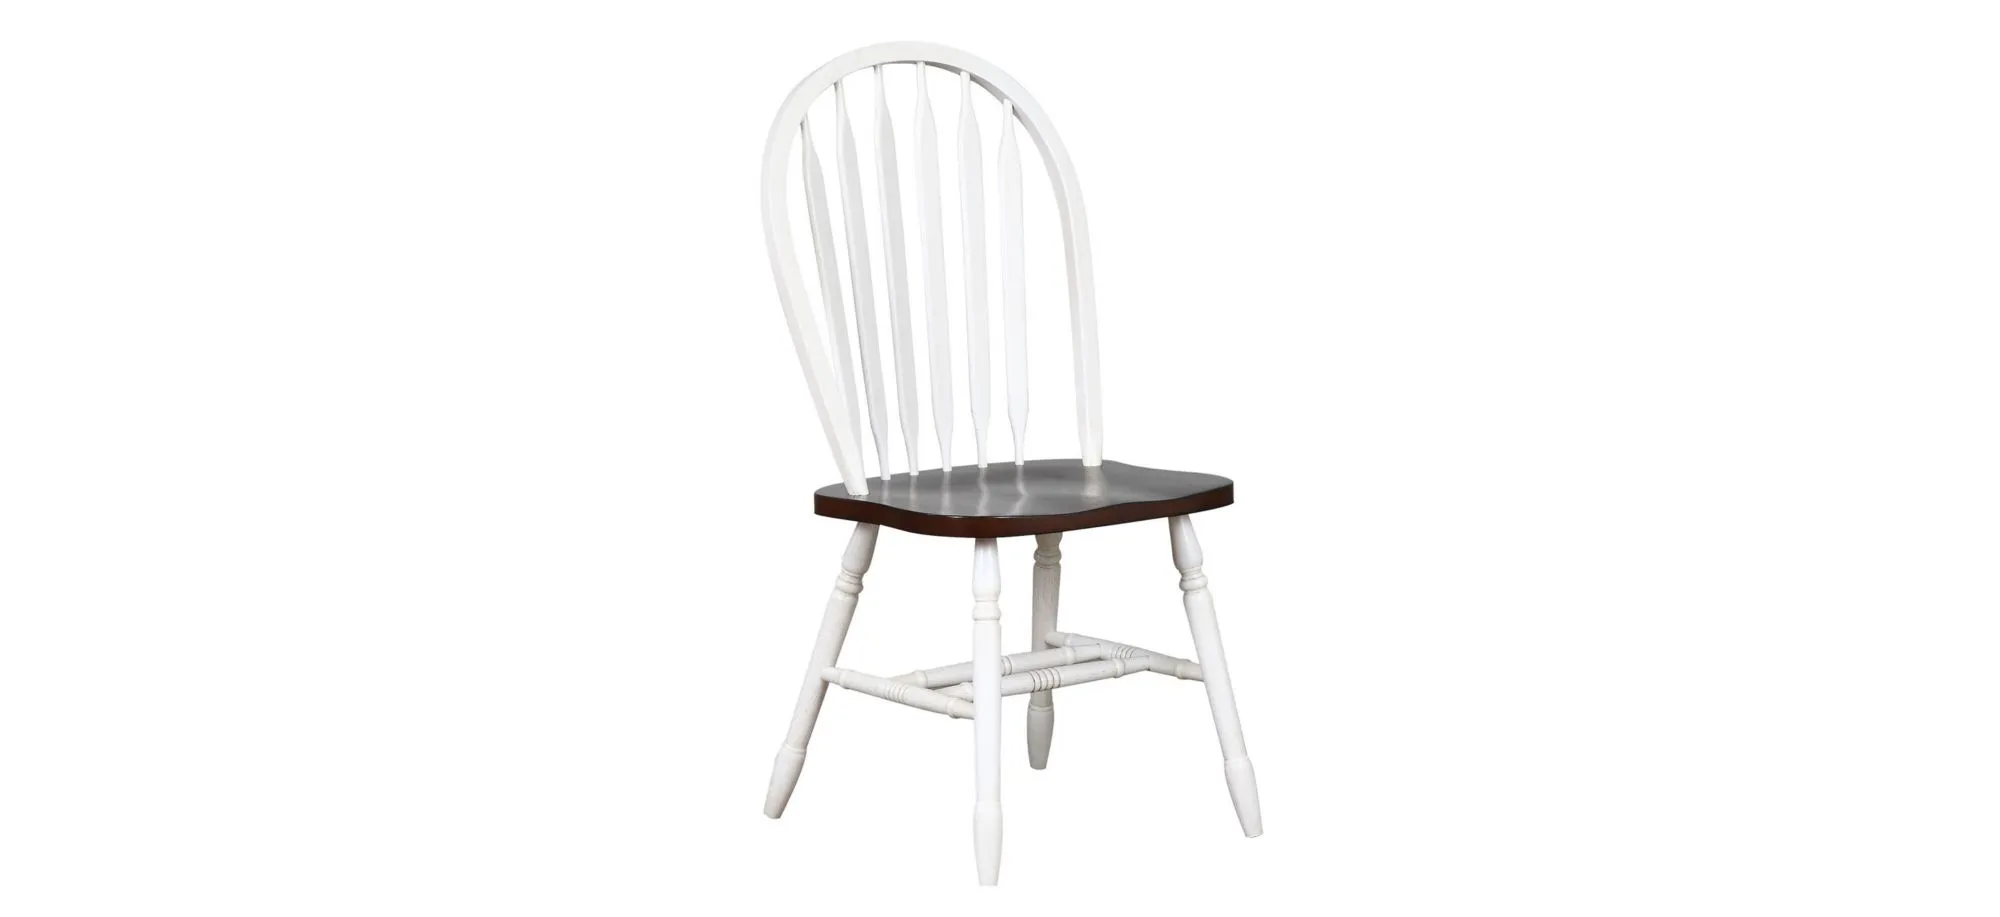 Fenway Arrowback Dining Chair: Set of 2 in Antique White/Chestnut by Sunset Trading